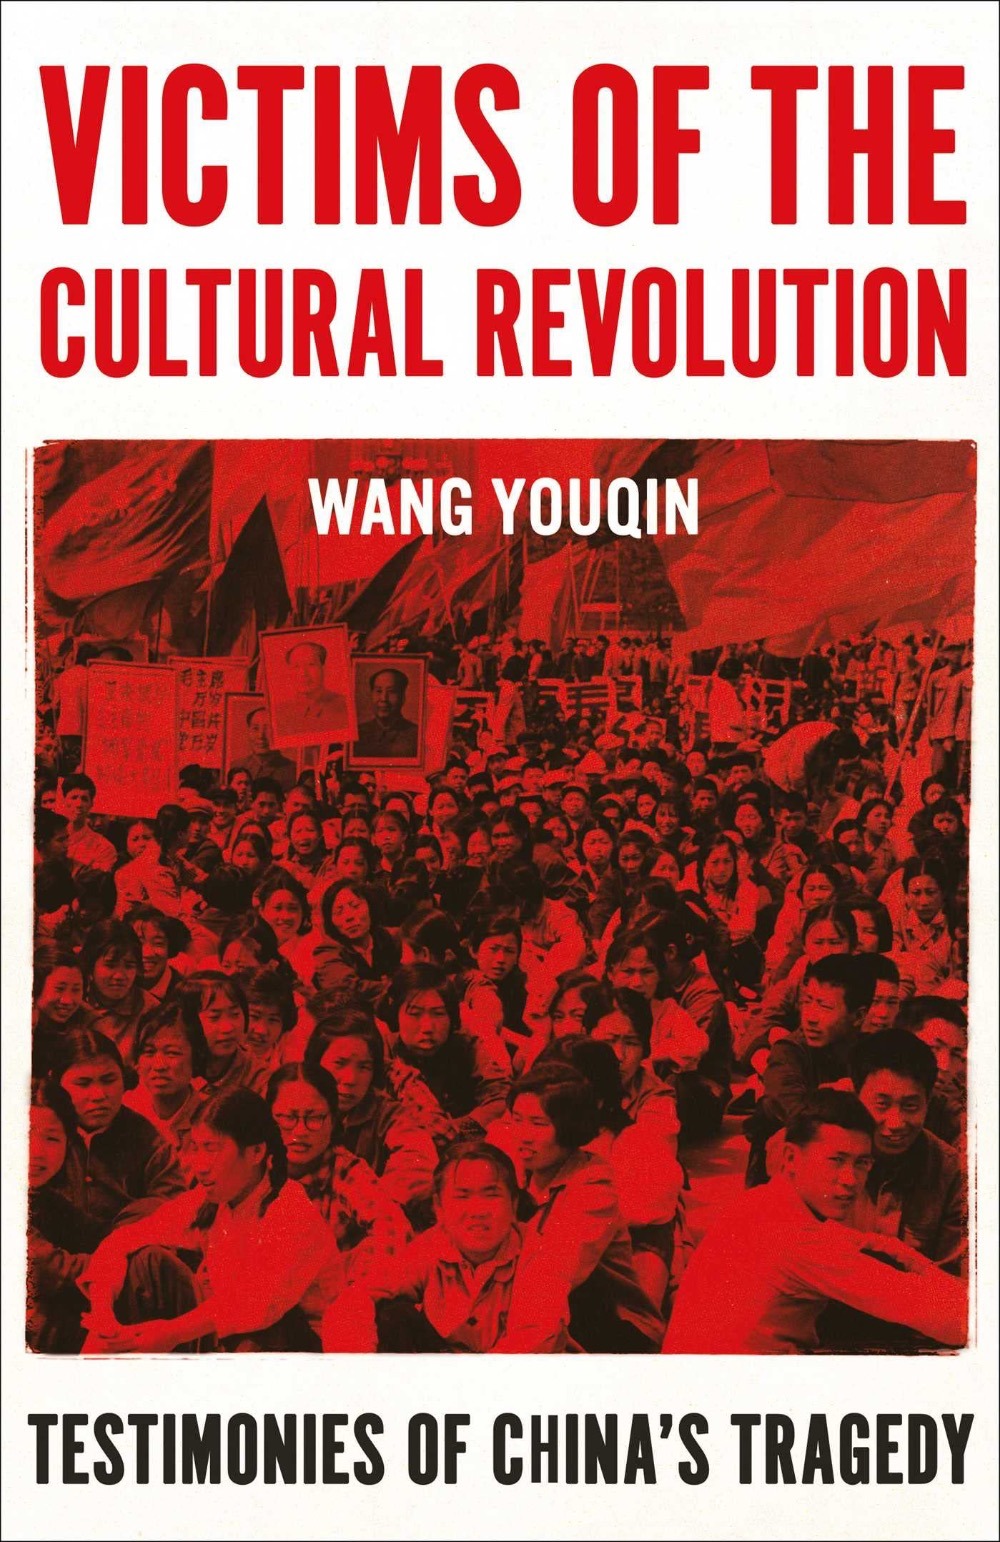 Victims of the Cultural Revolution: Testimonies of China's Tragedy by Wang Youqin